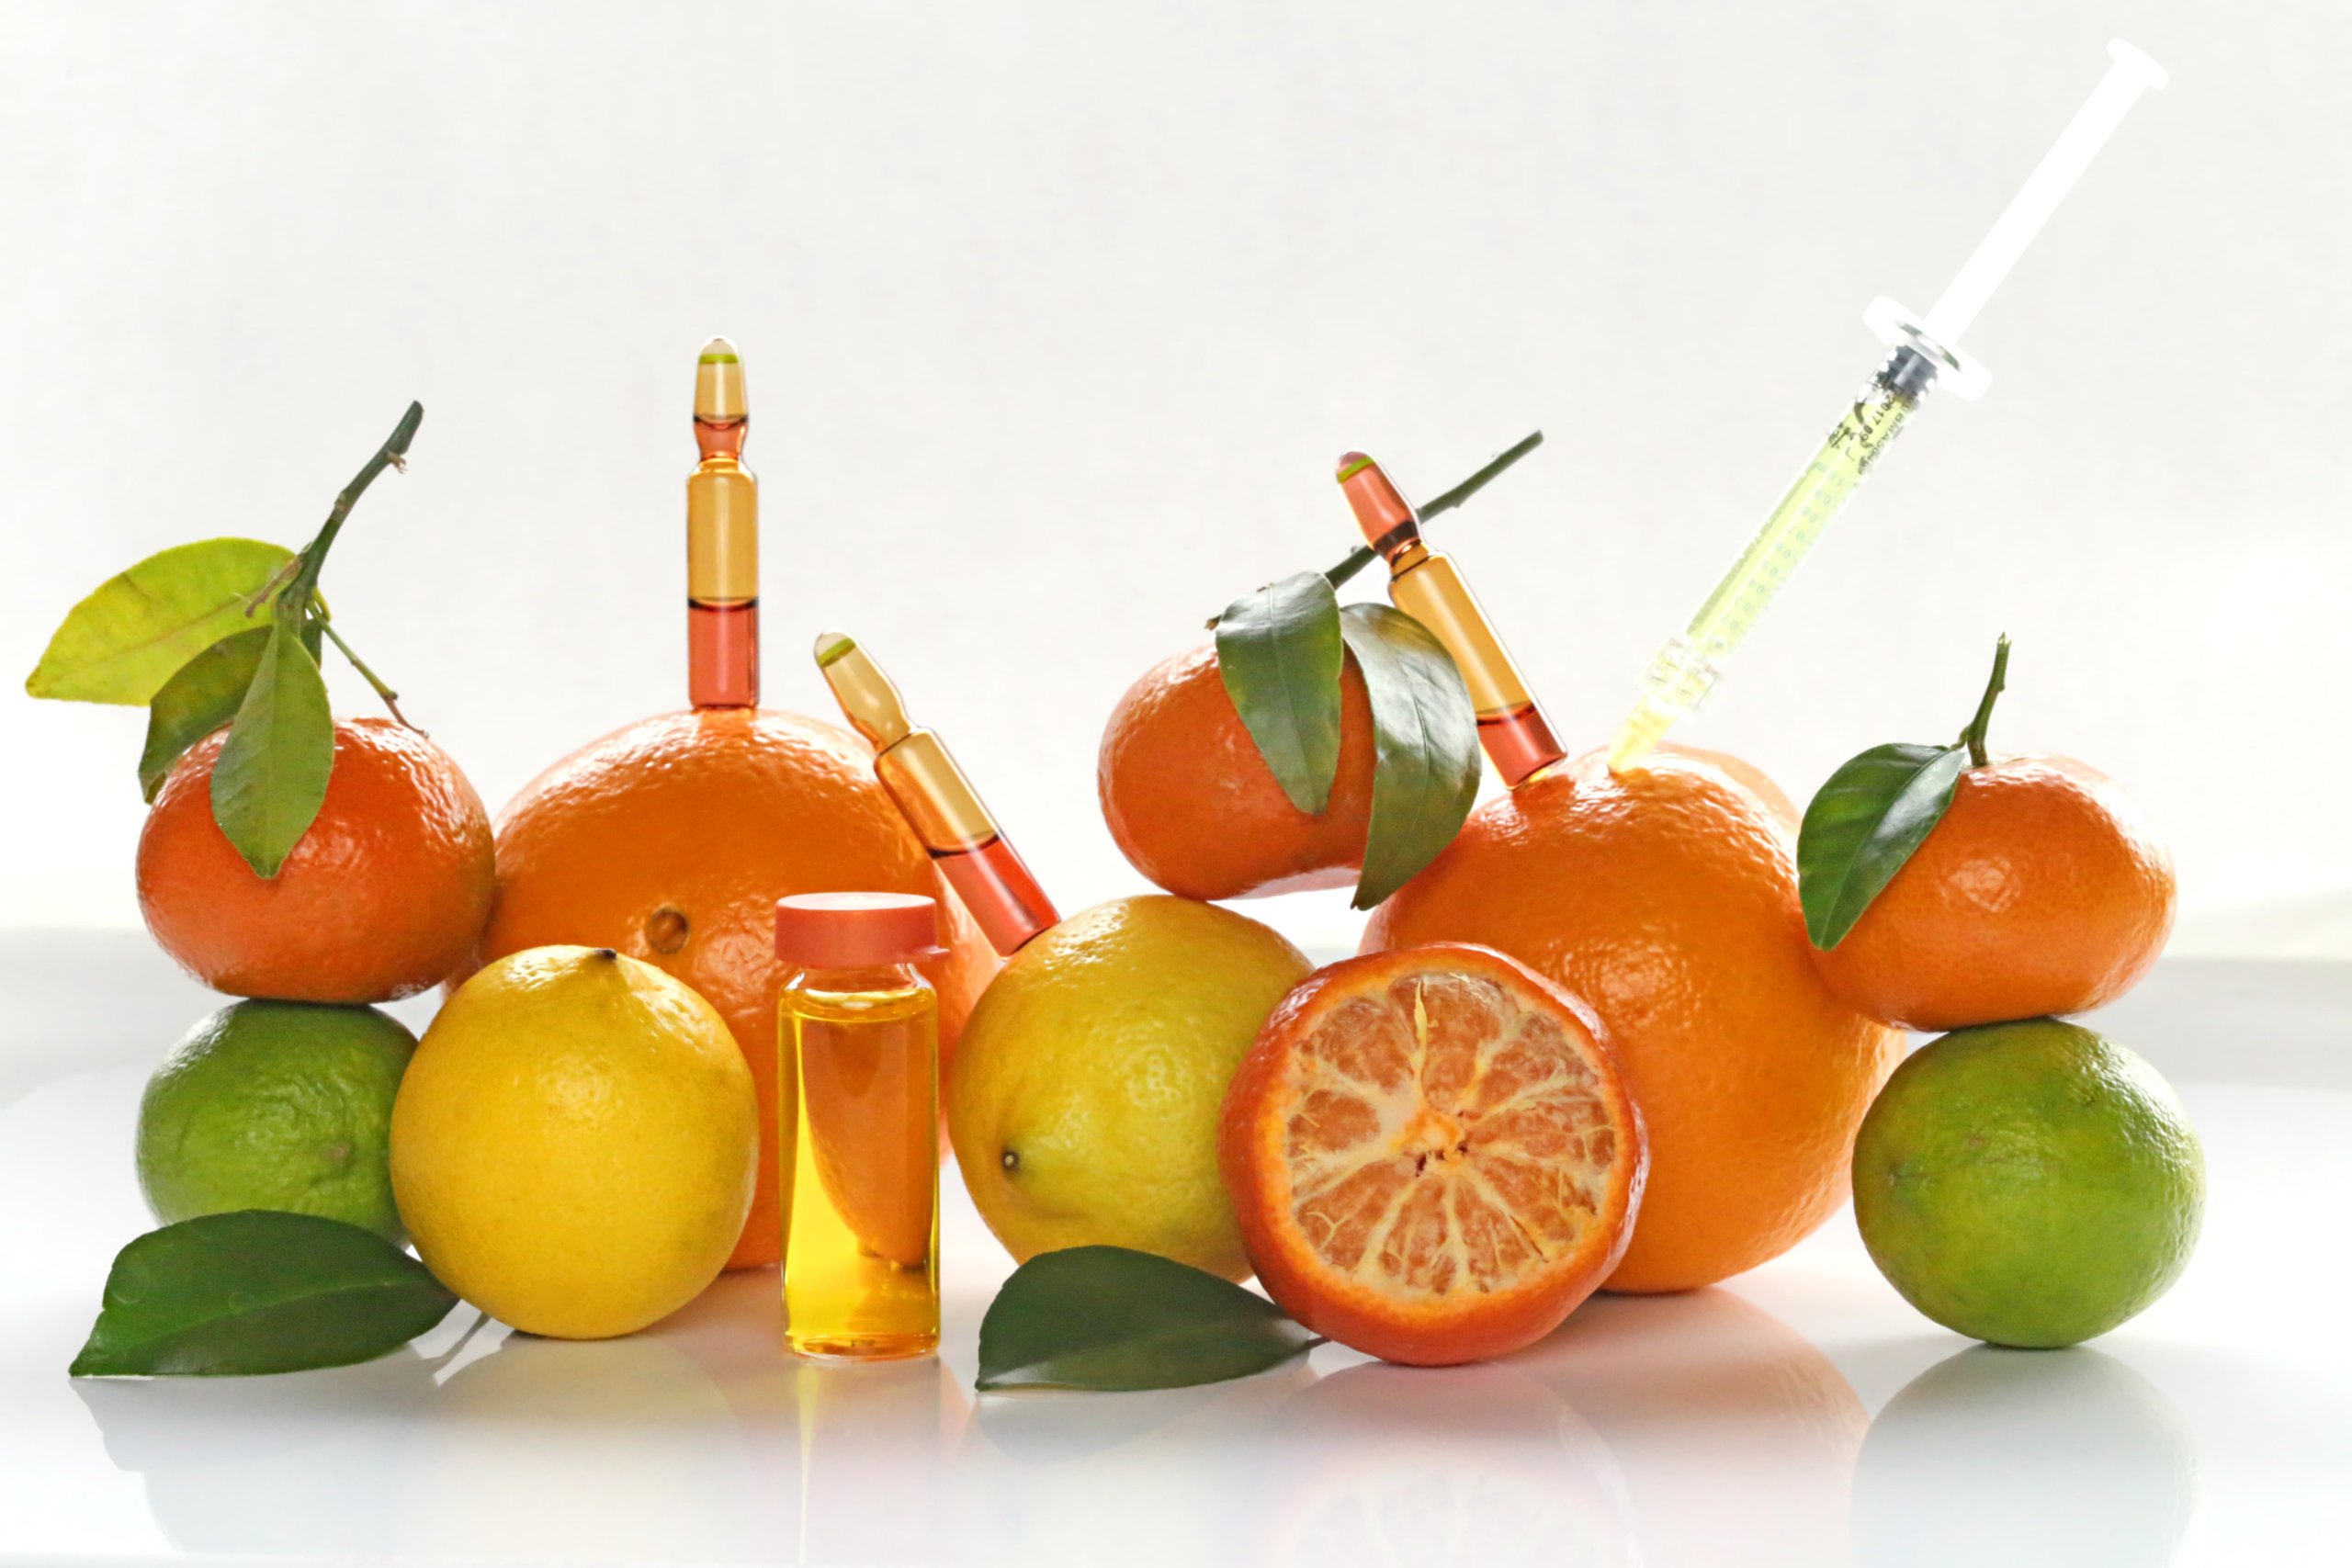 Ampoules and Serum with Vitamin C. Immunity and injection . Prevention of colds and flu.Ampoules, syringes, tangerines and oranges on a bright yellow background.Mesotherapy and rejuvenation | Resa Medical Aesthetics in Scottsdale, AZ